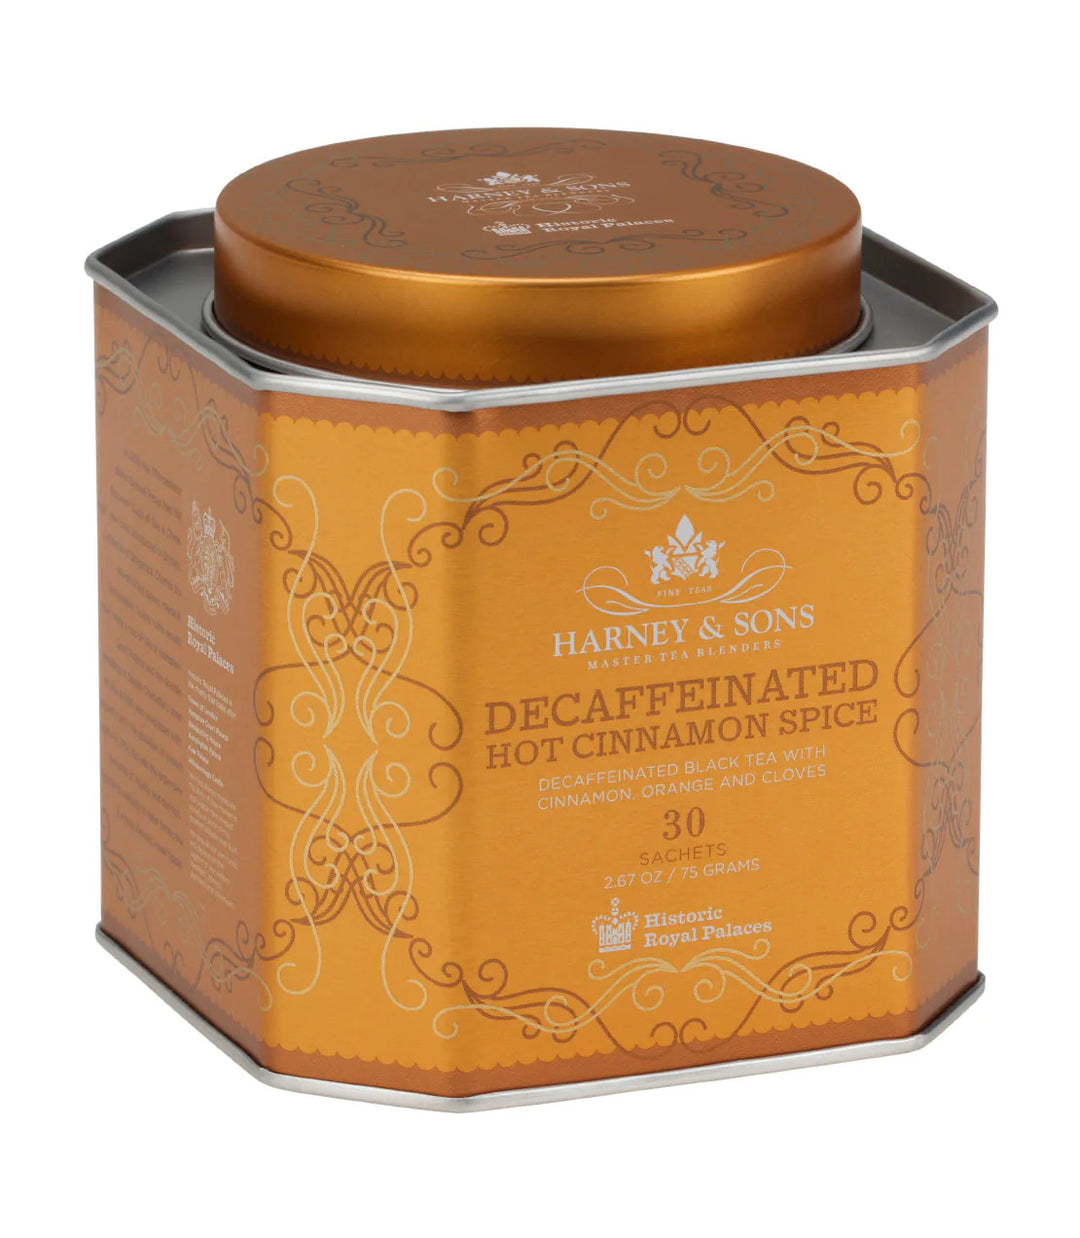 Decaf Hot Cinnamon Spice Tea by Harney & Sons.